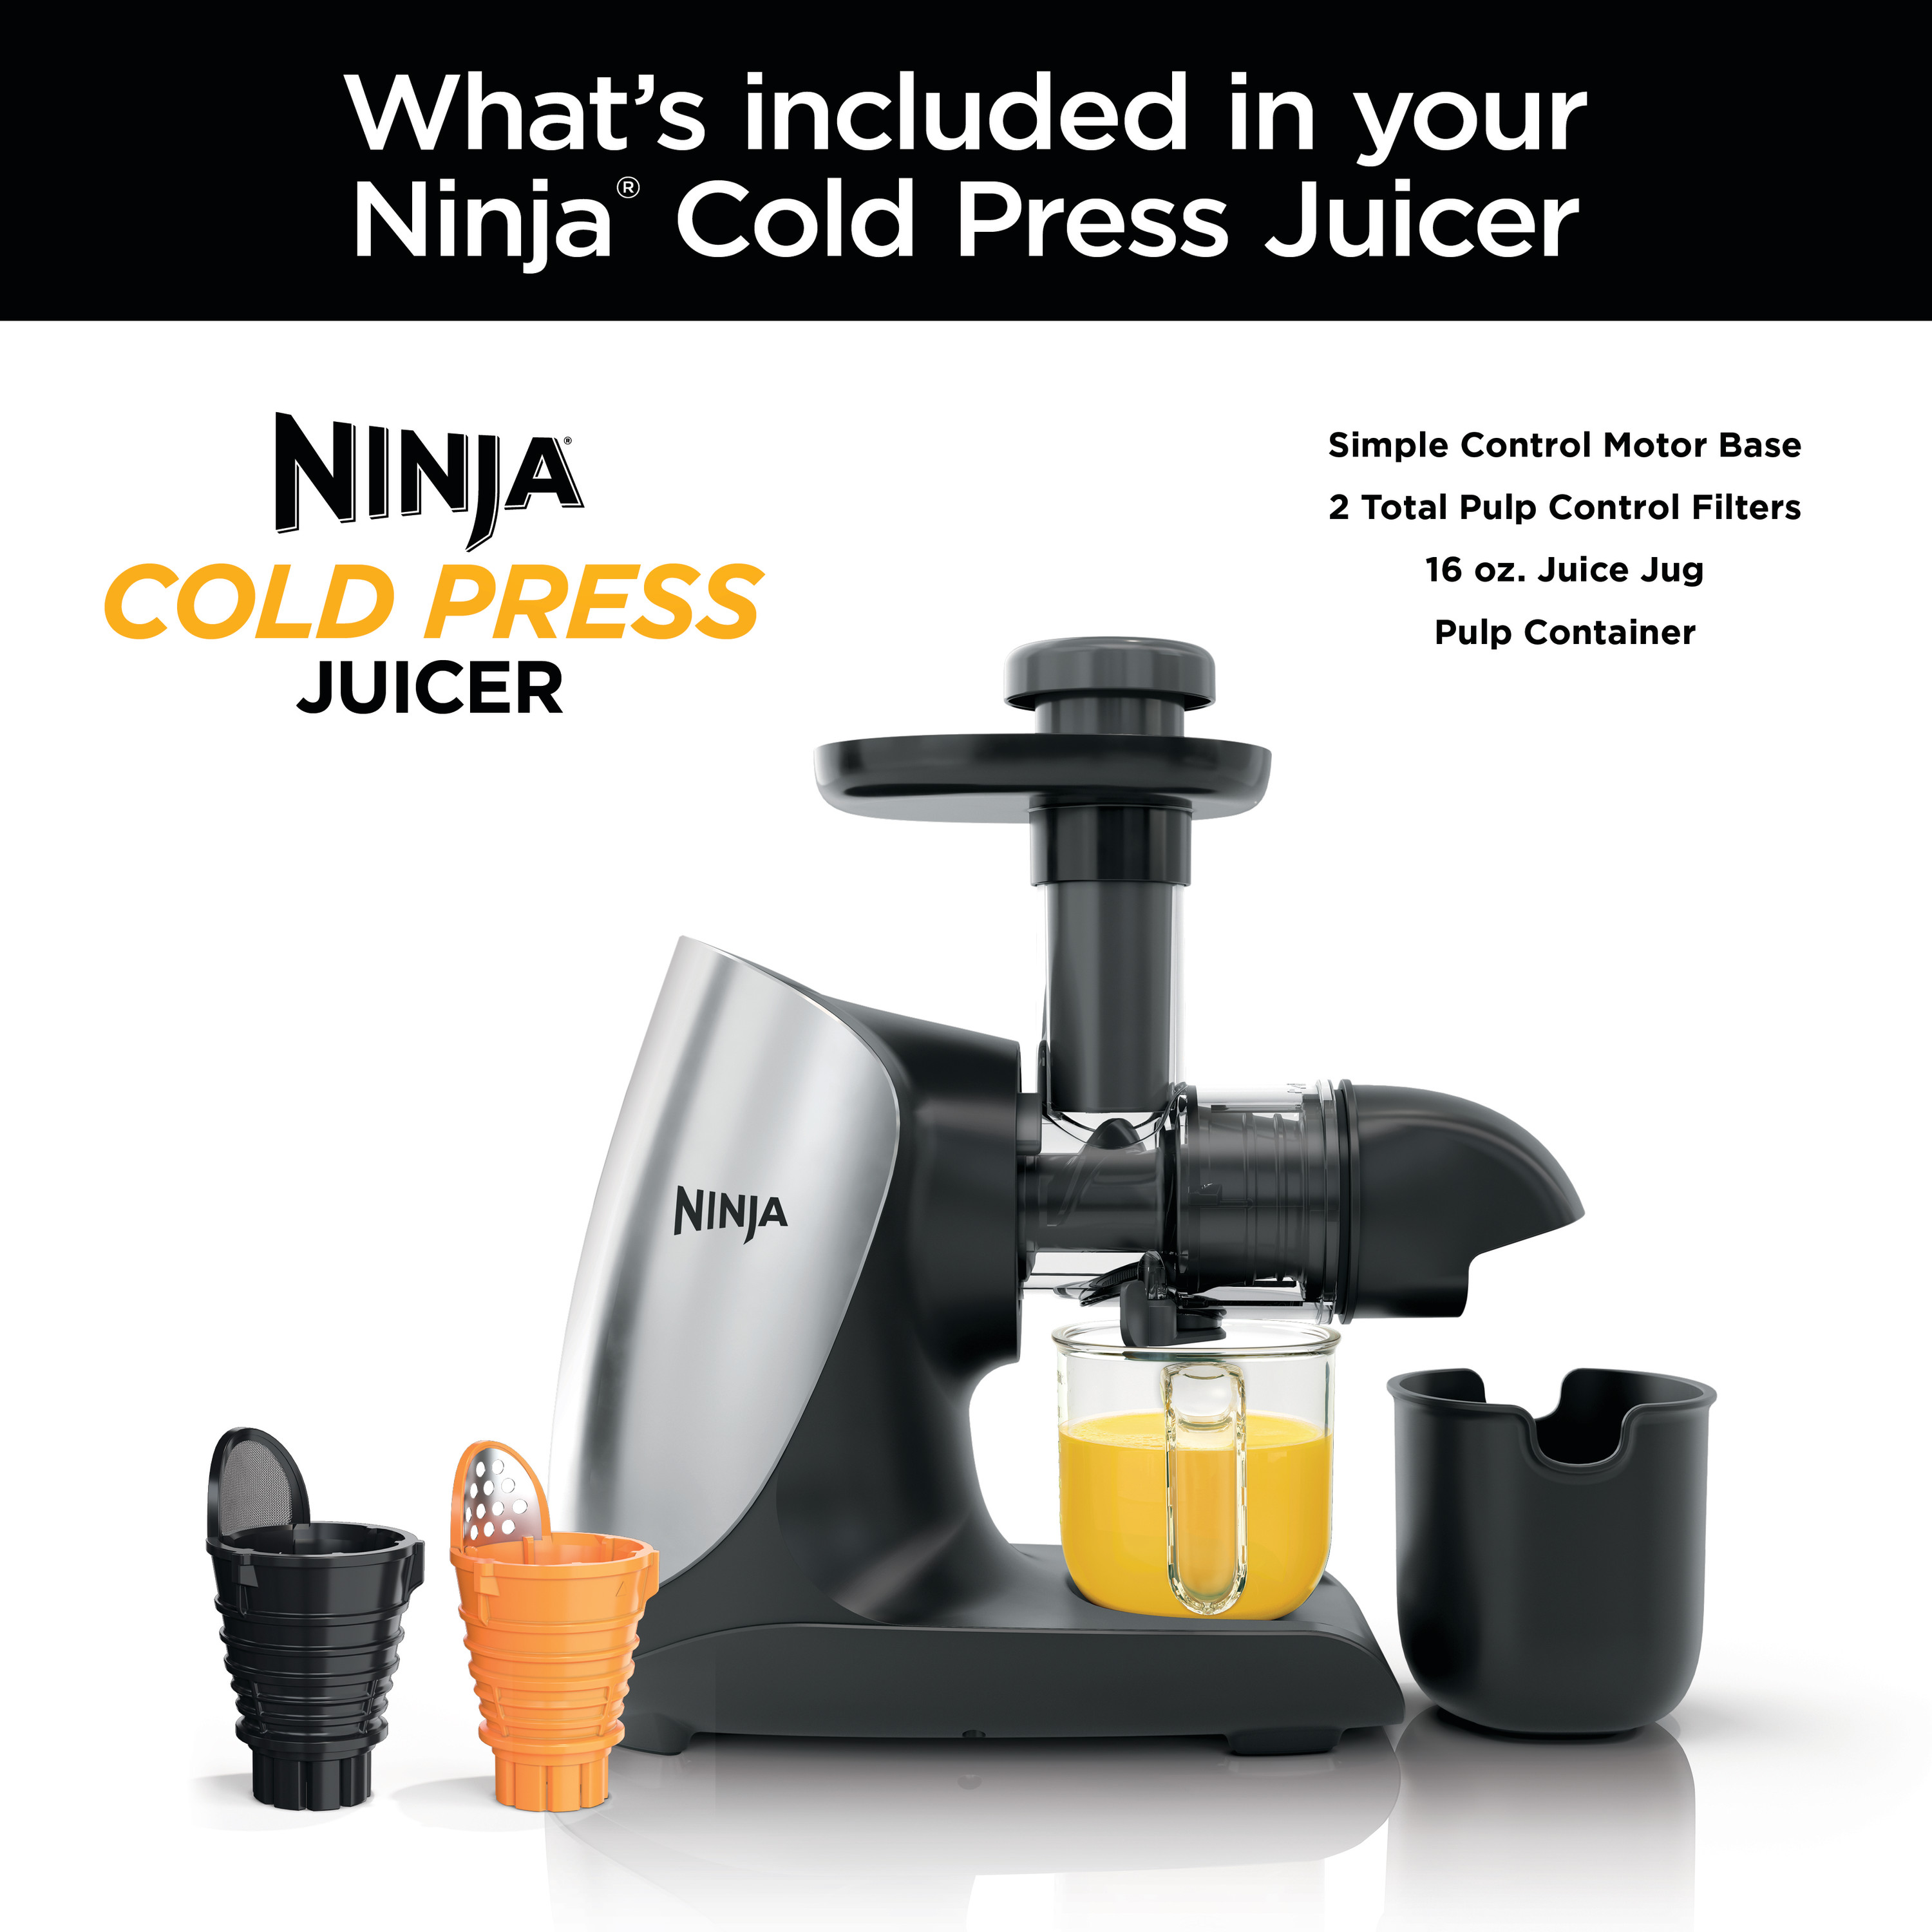 Ninja® Cold Press Juicer Pro - Powerful Slow Juicer with Total Pulp Control - Cloud Silver, JC100 - image 2 of 13